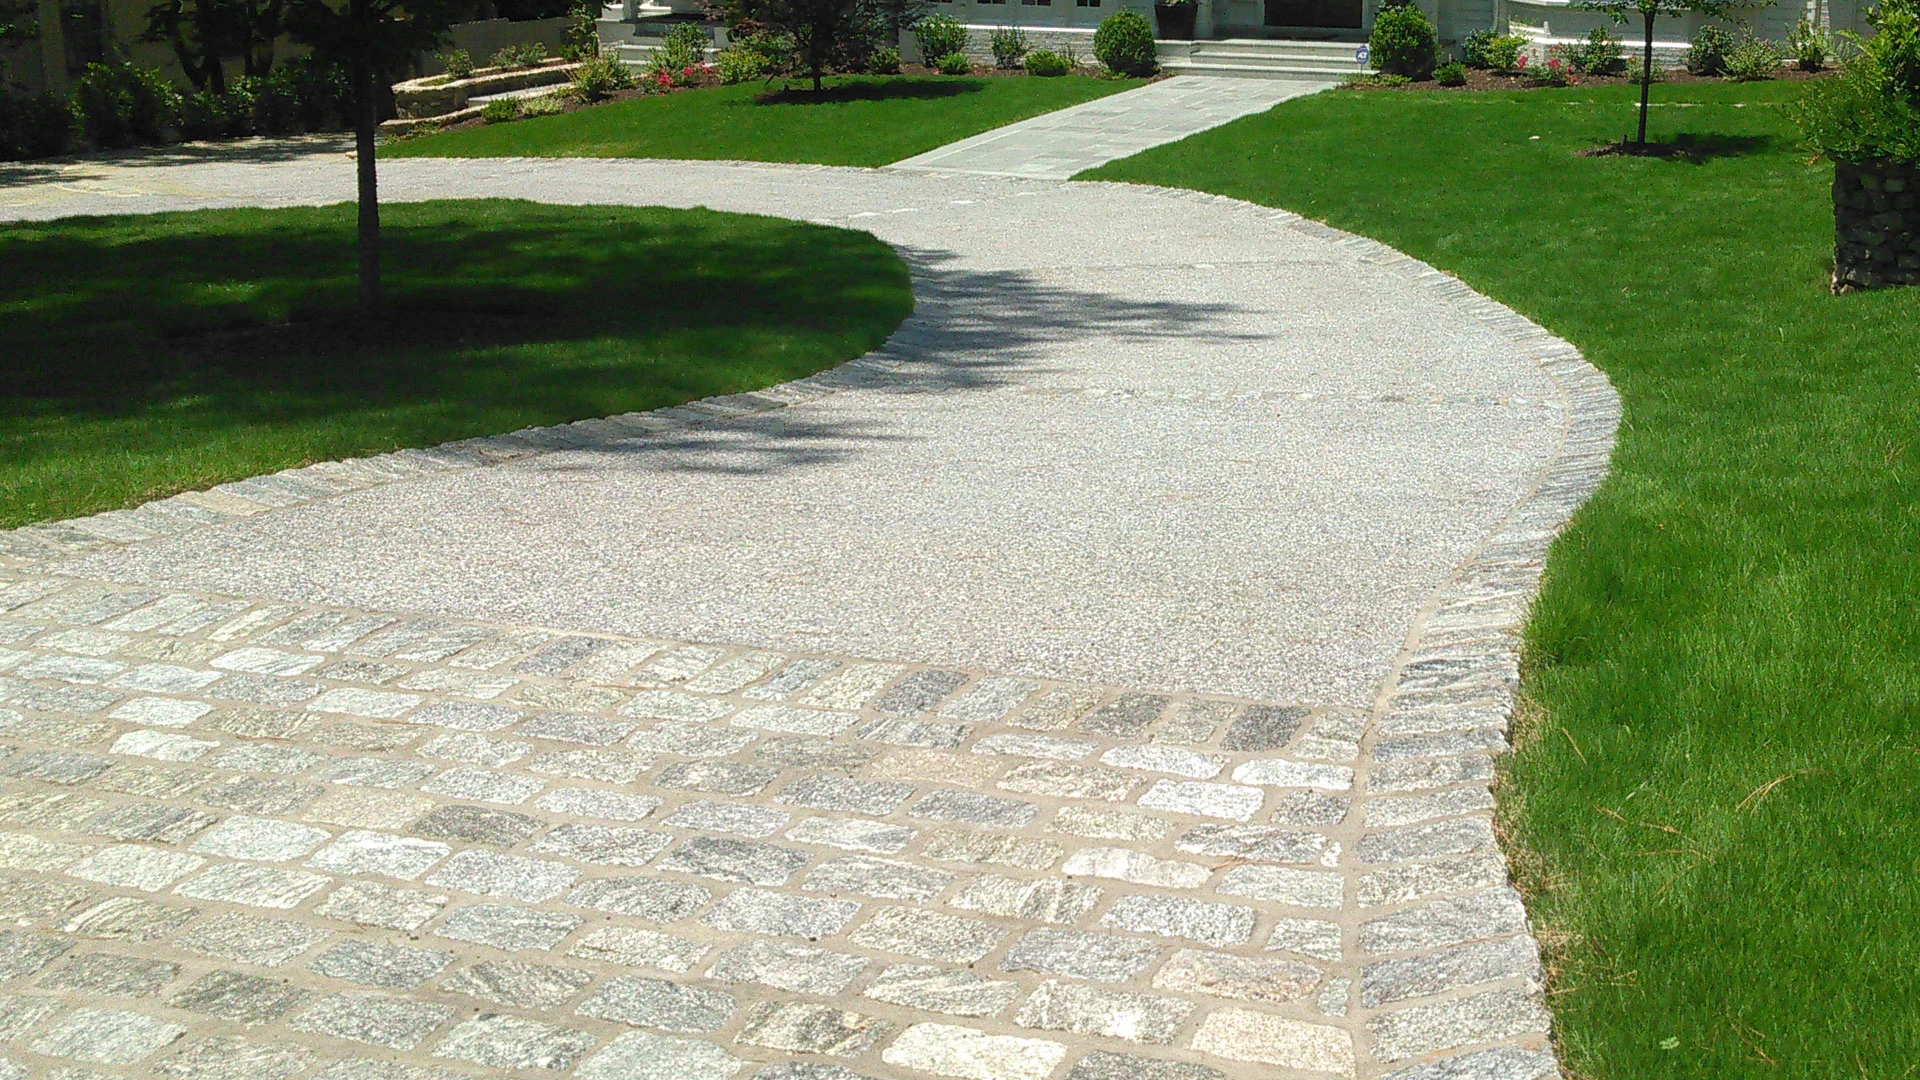 Paver driveways built to add additional parking at a home in Atlanta, GA.